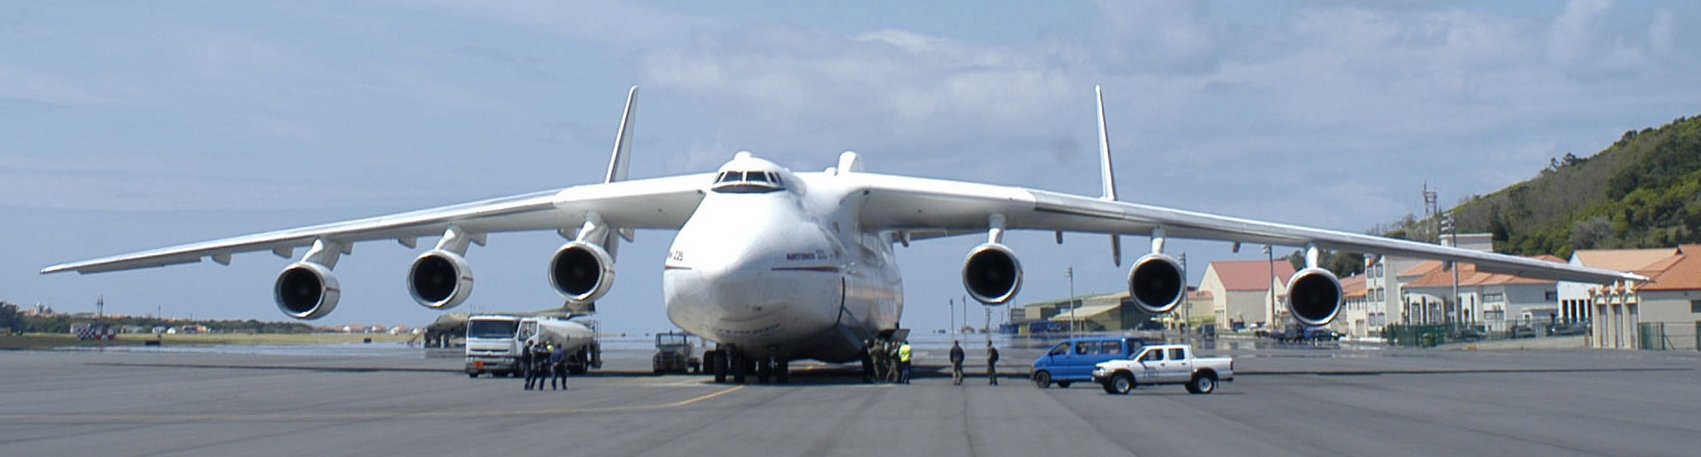 [Image: An-225_front_day_V1.jpg]